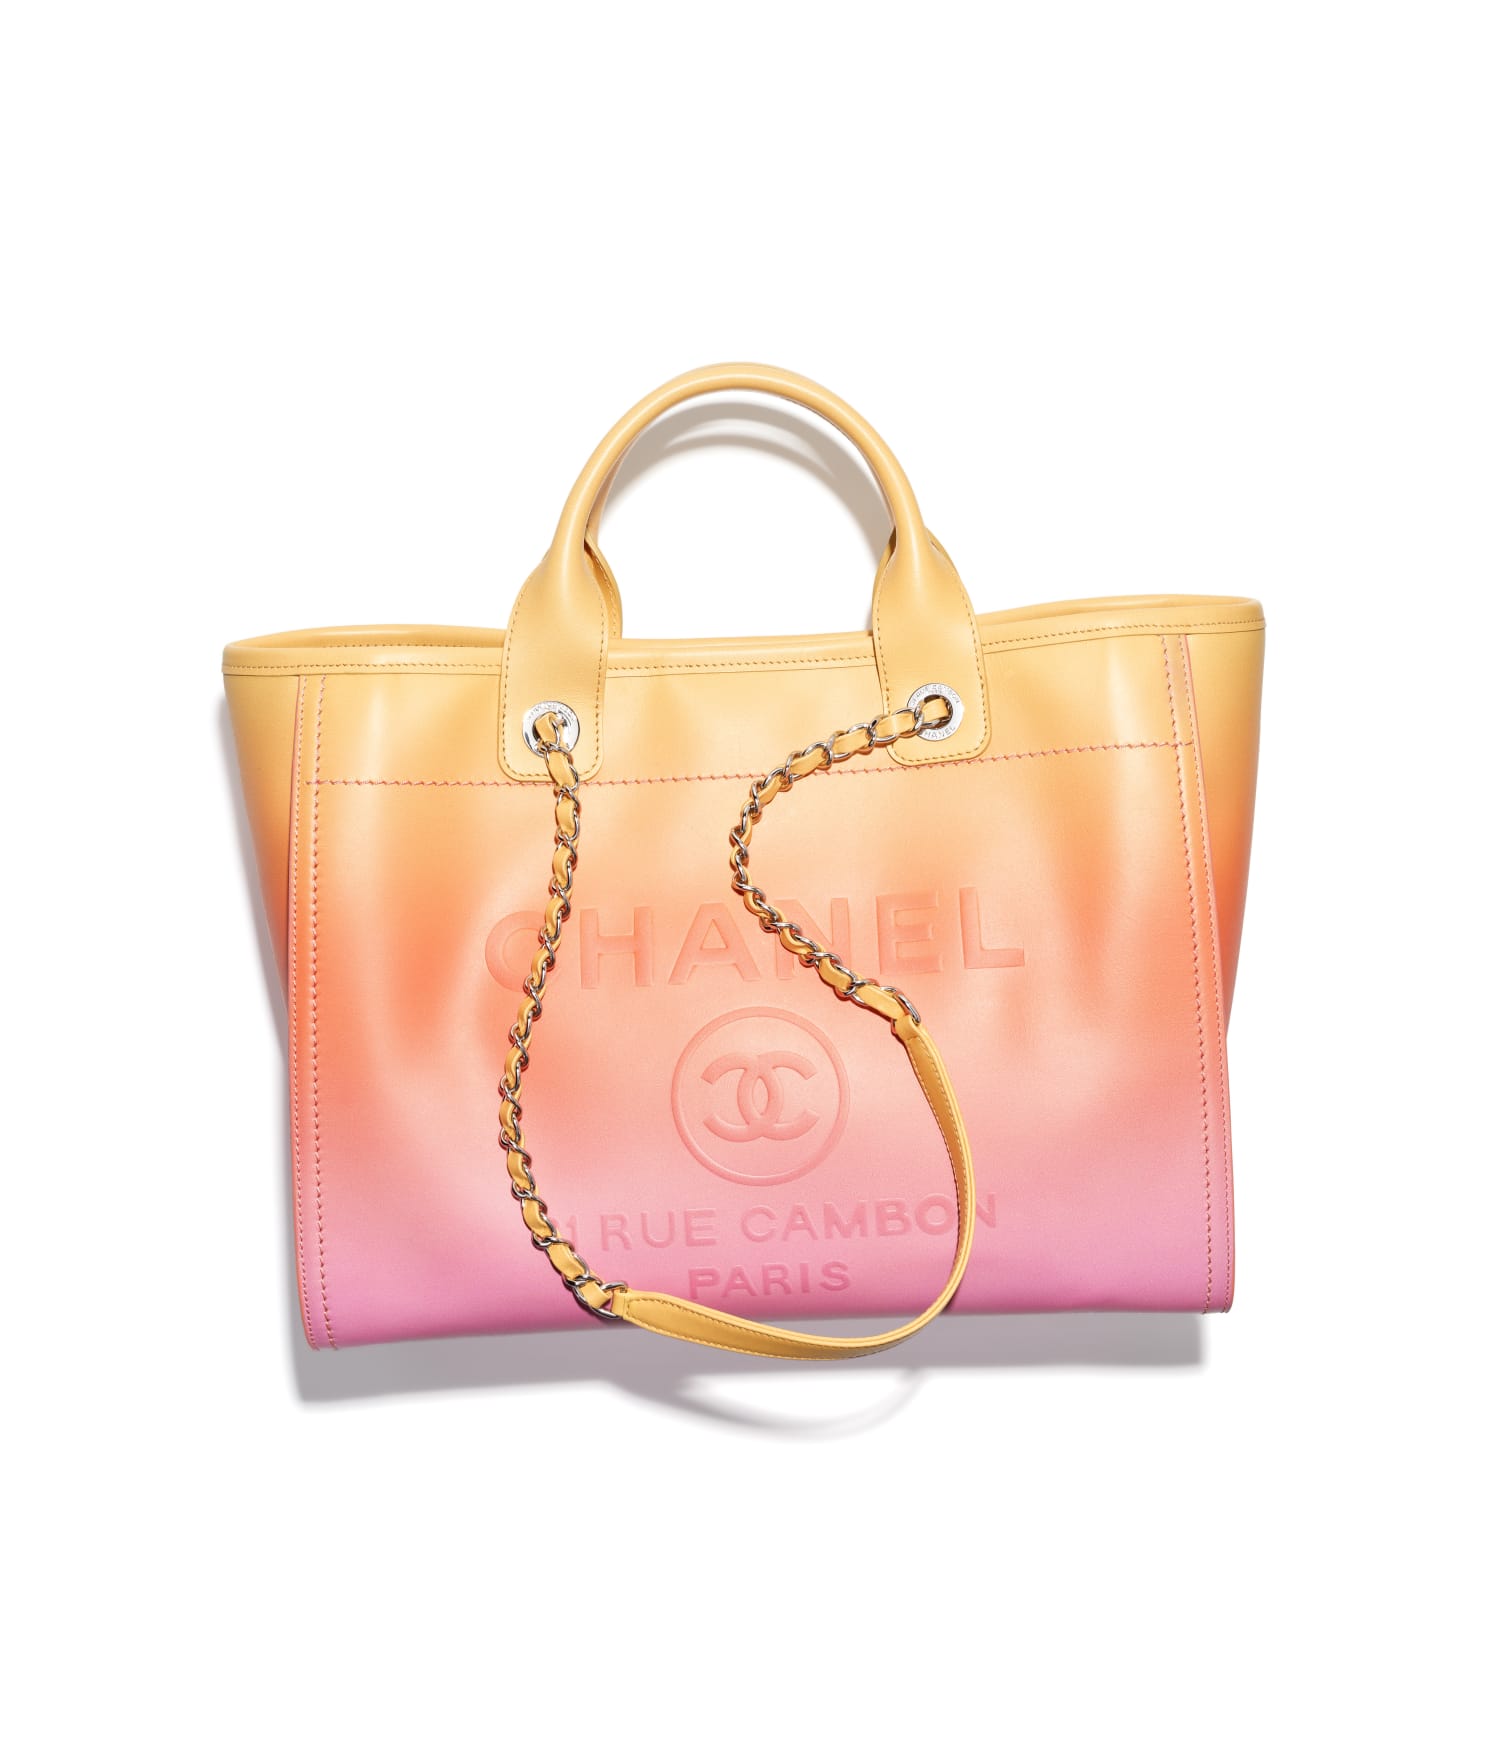 chanel_bag-in-shaded-yellow-orange-and-pink-leather-and-metal-as3351-b15031-nt638-hd-LD